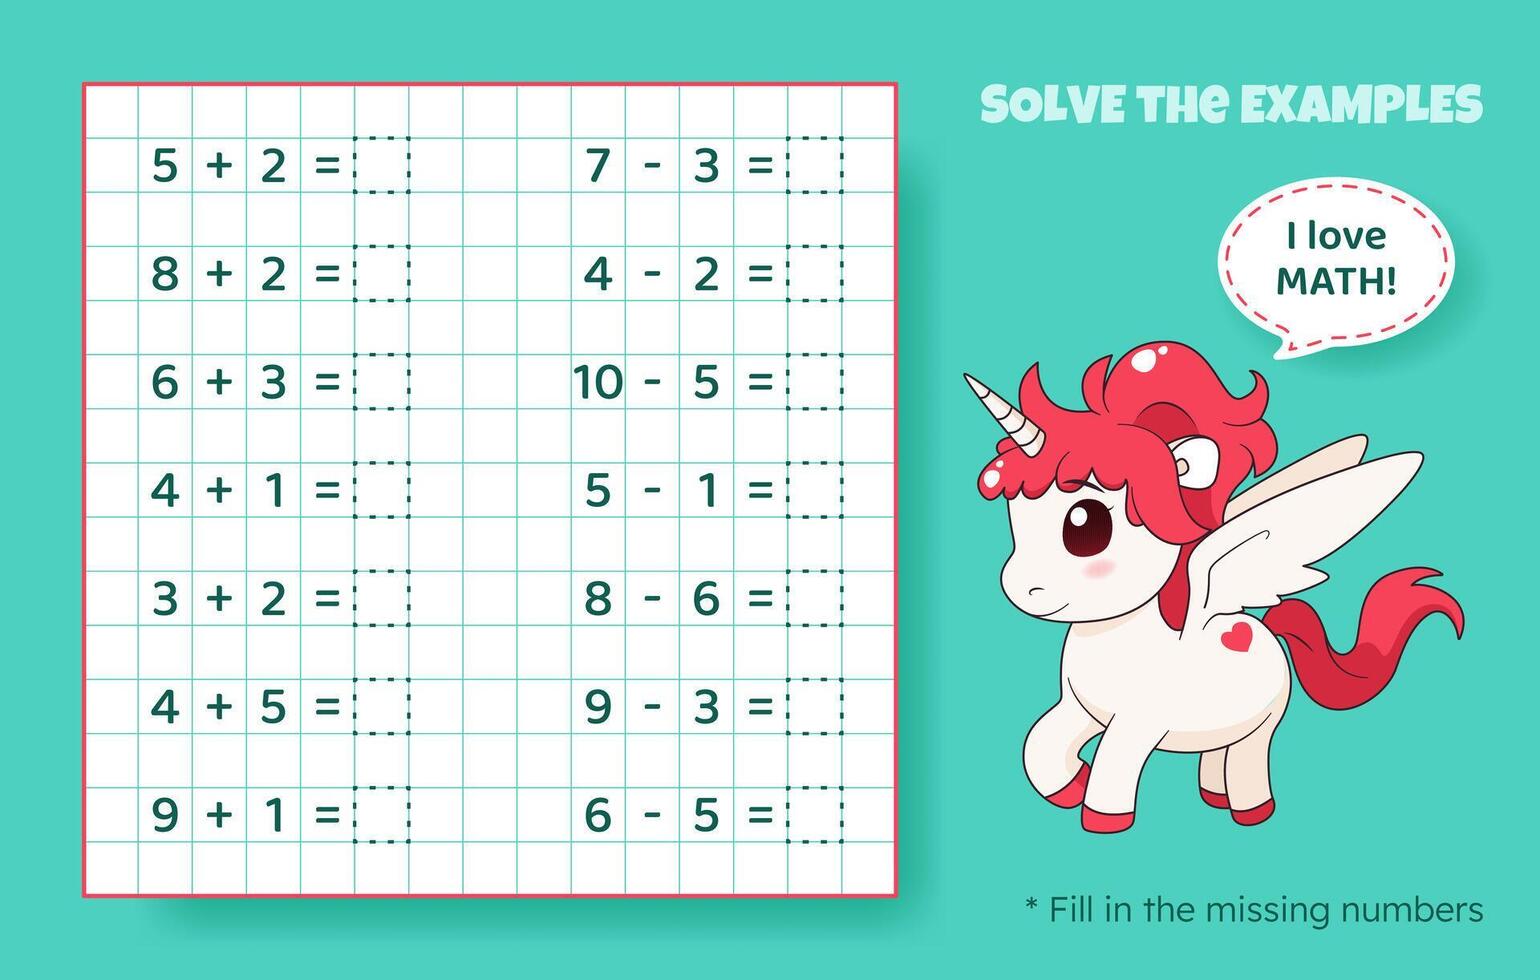 Solve the examples. Addition and subtraction up to 10. Mathematical puzzle game. Worksheet for school, preschool kids. Vector illustration. Cartoon educational game with cute unicorn for children.